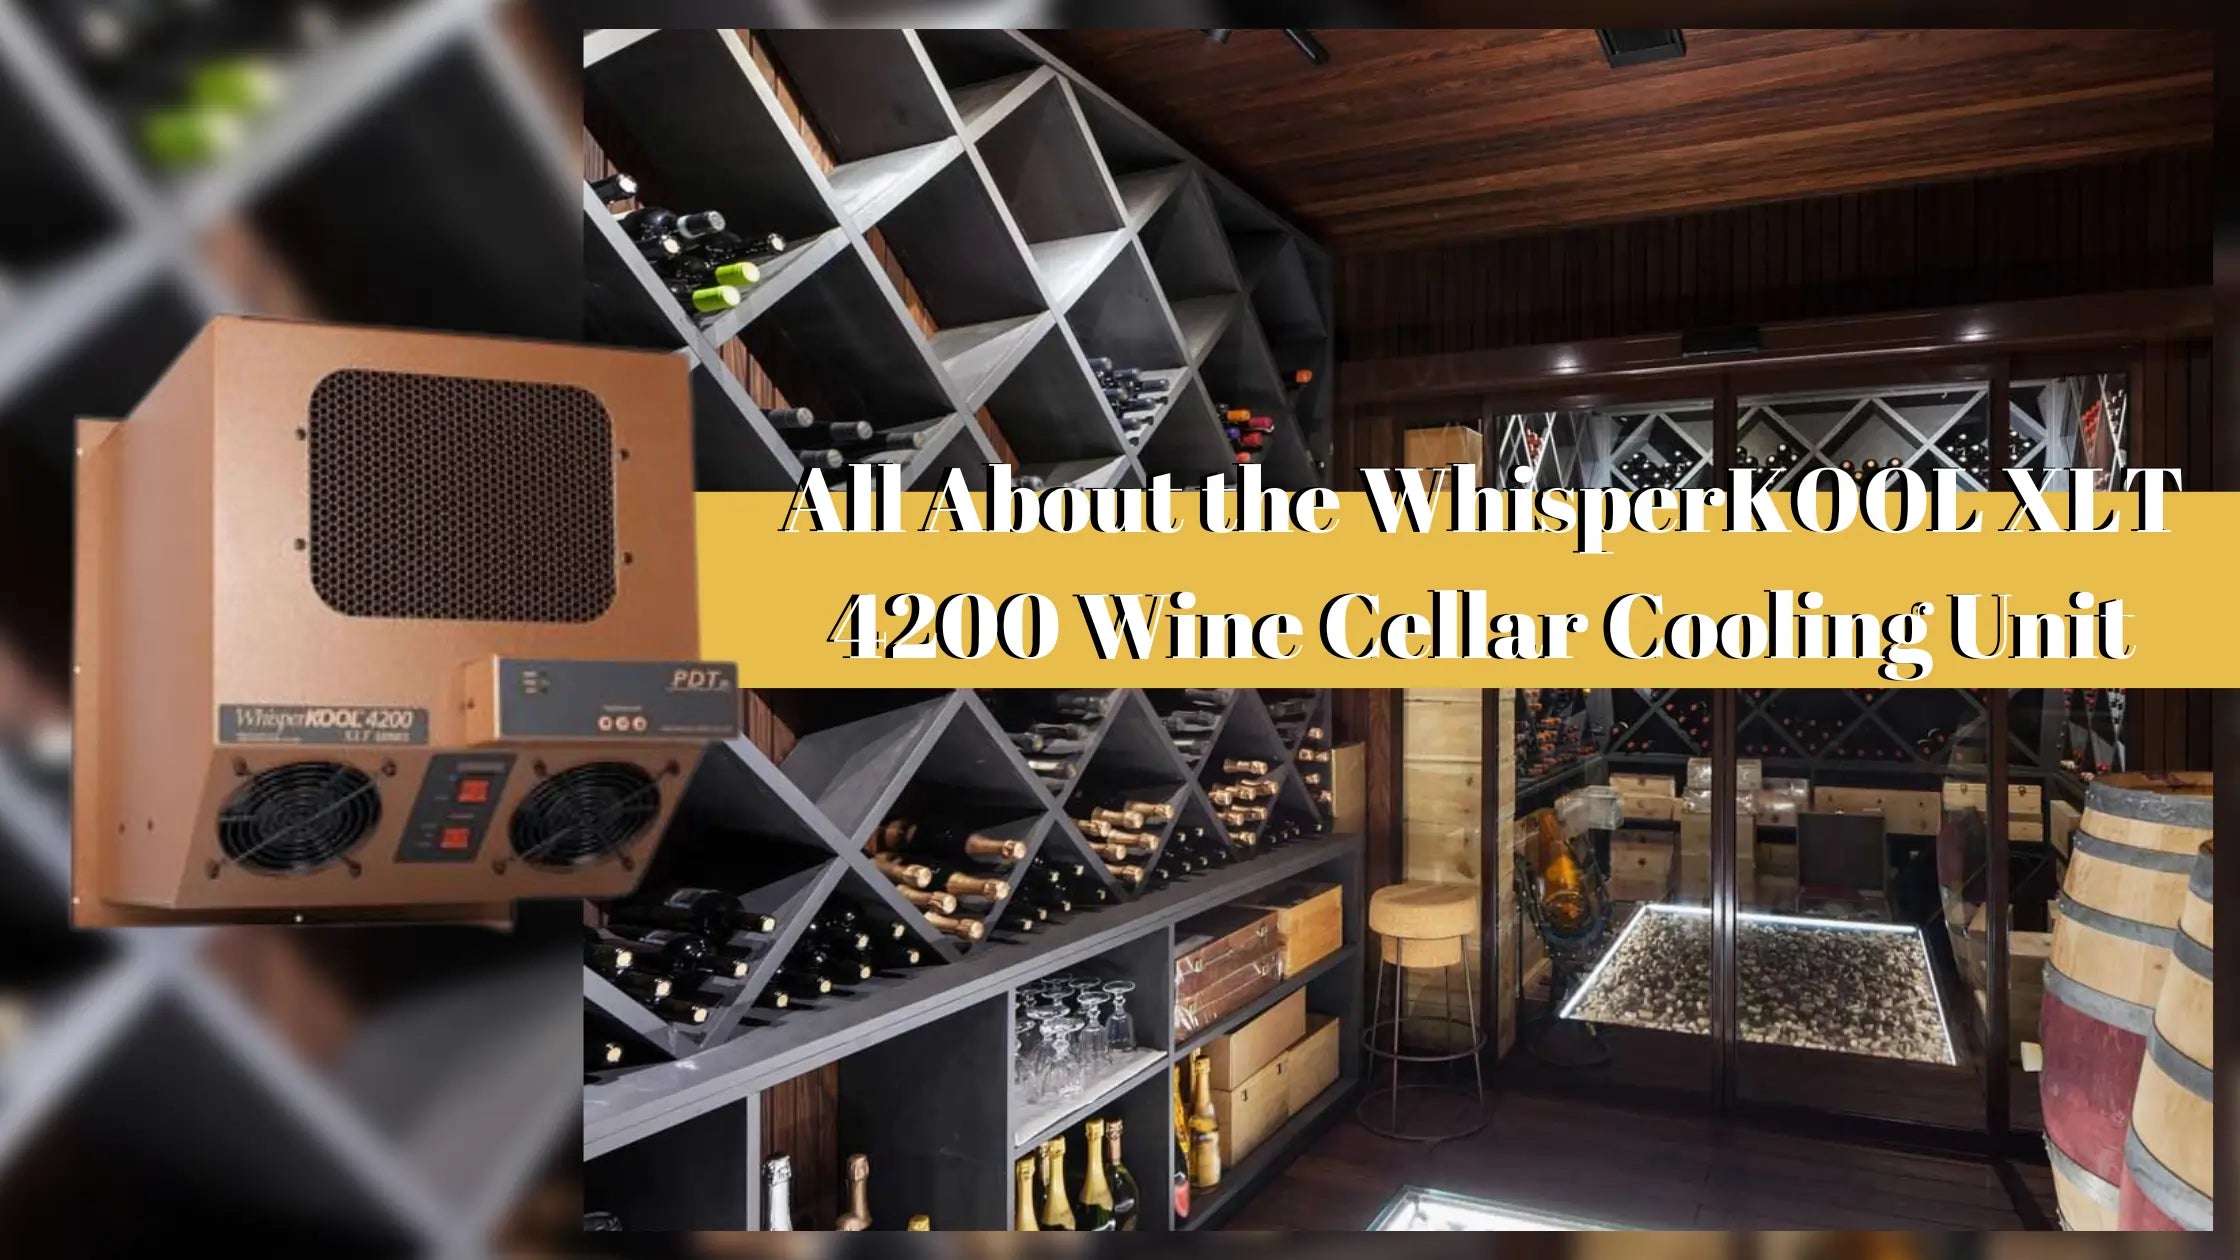 WhisperKOOL XLT 4200 Wine Cooling System - Wine Cellar | Wine Coolers Empire - Trusted Dealer